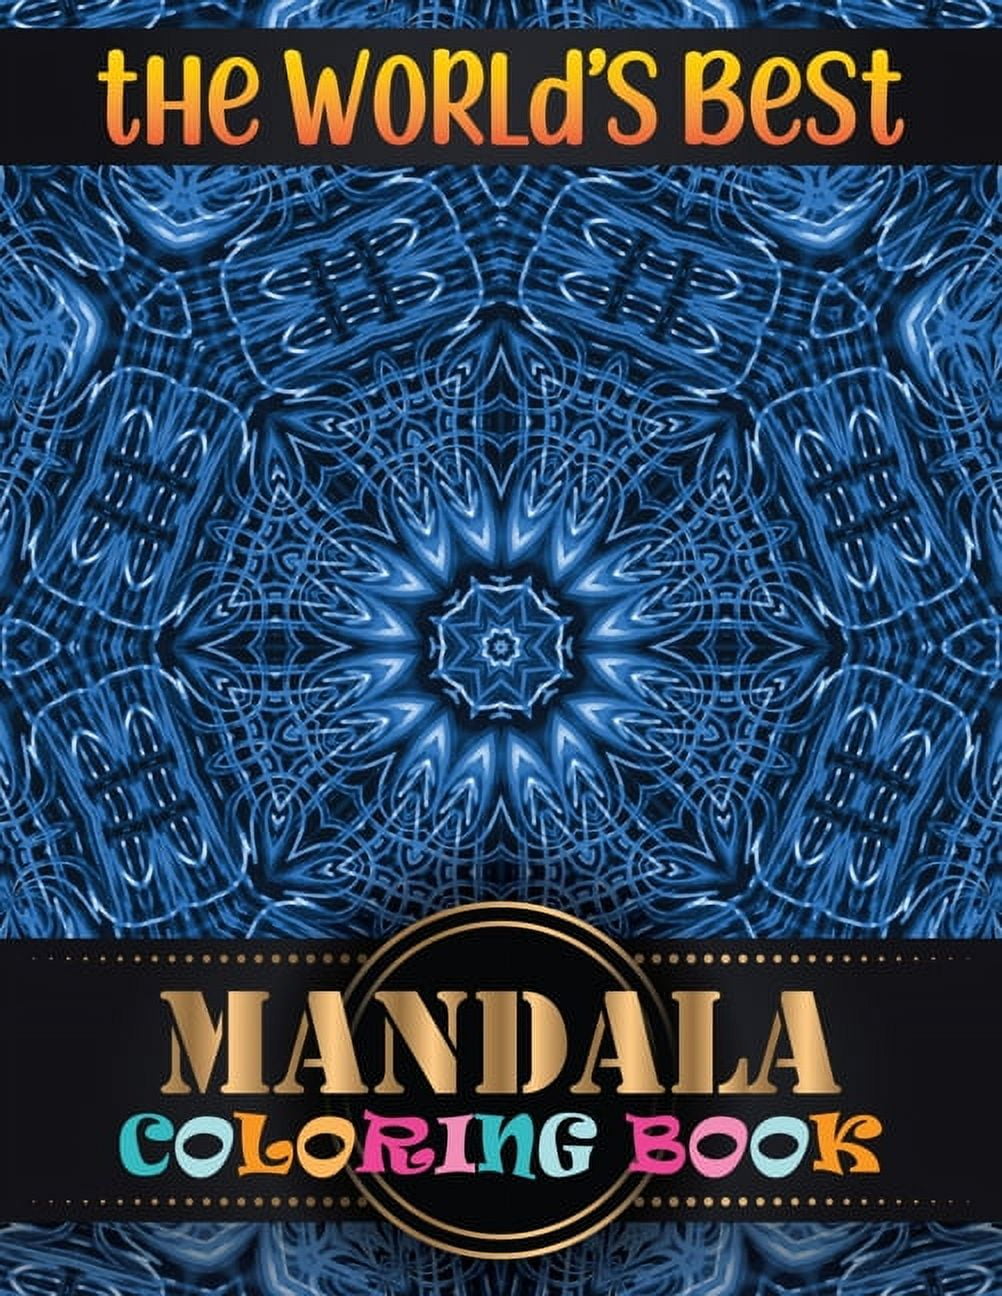 The World's Best Mandala Coloring Book: Adult Coloring Book